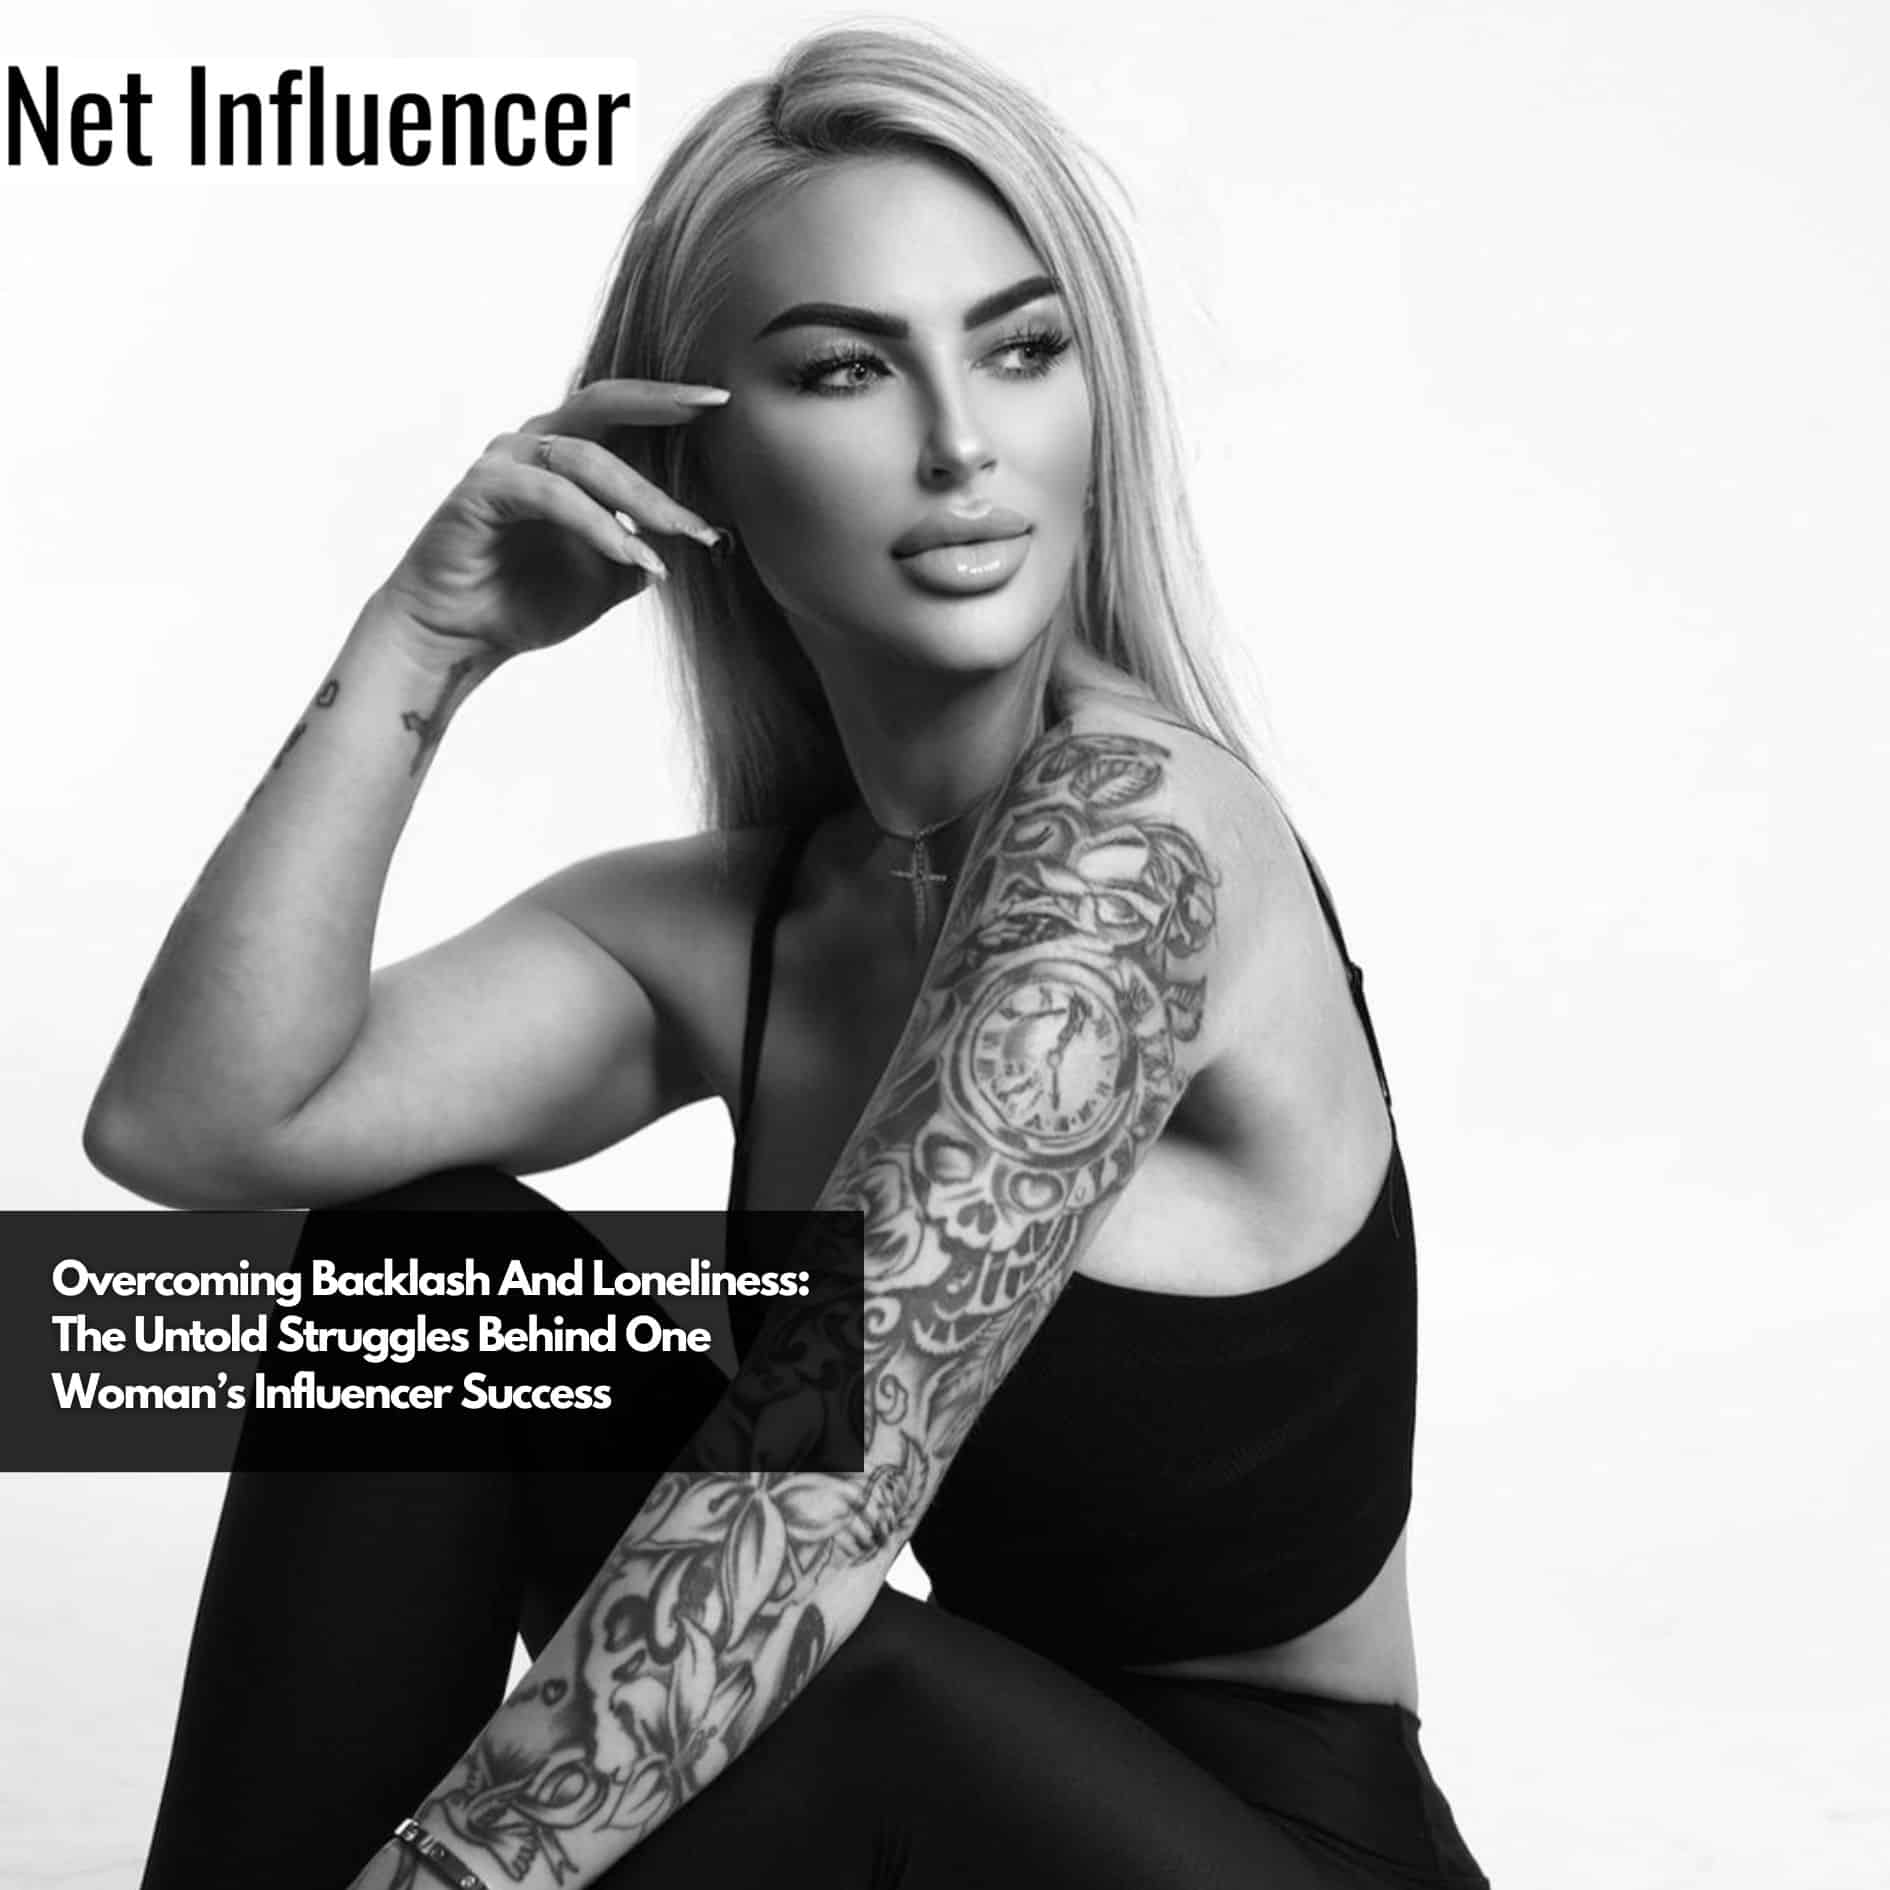 Overcoming Backlash And Loneliness The Untold Struggles Behind One Woman’s Influencer Success